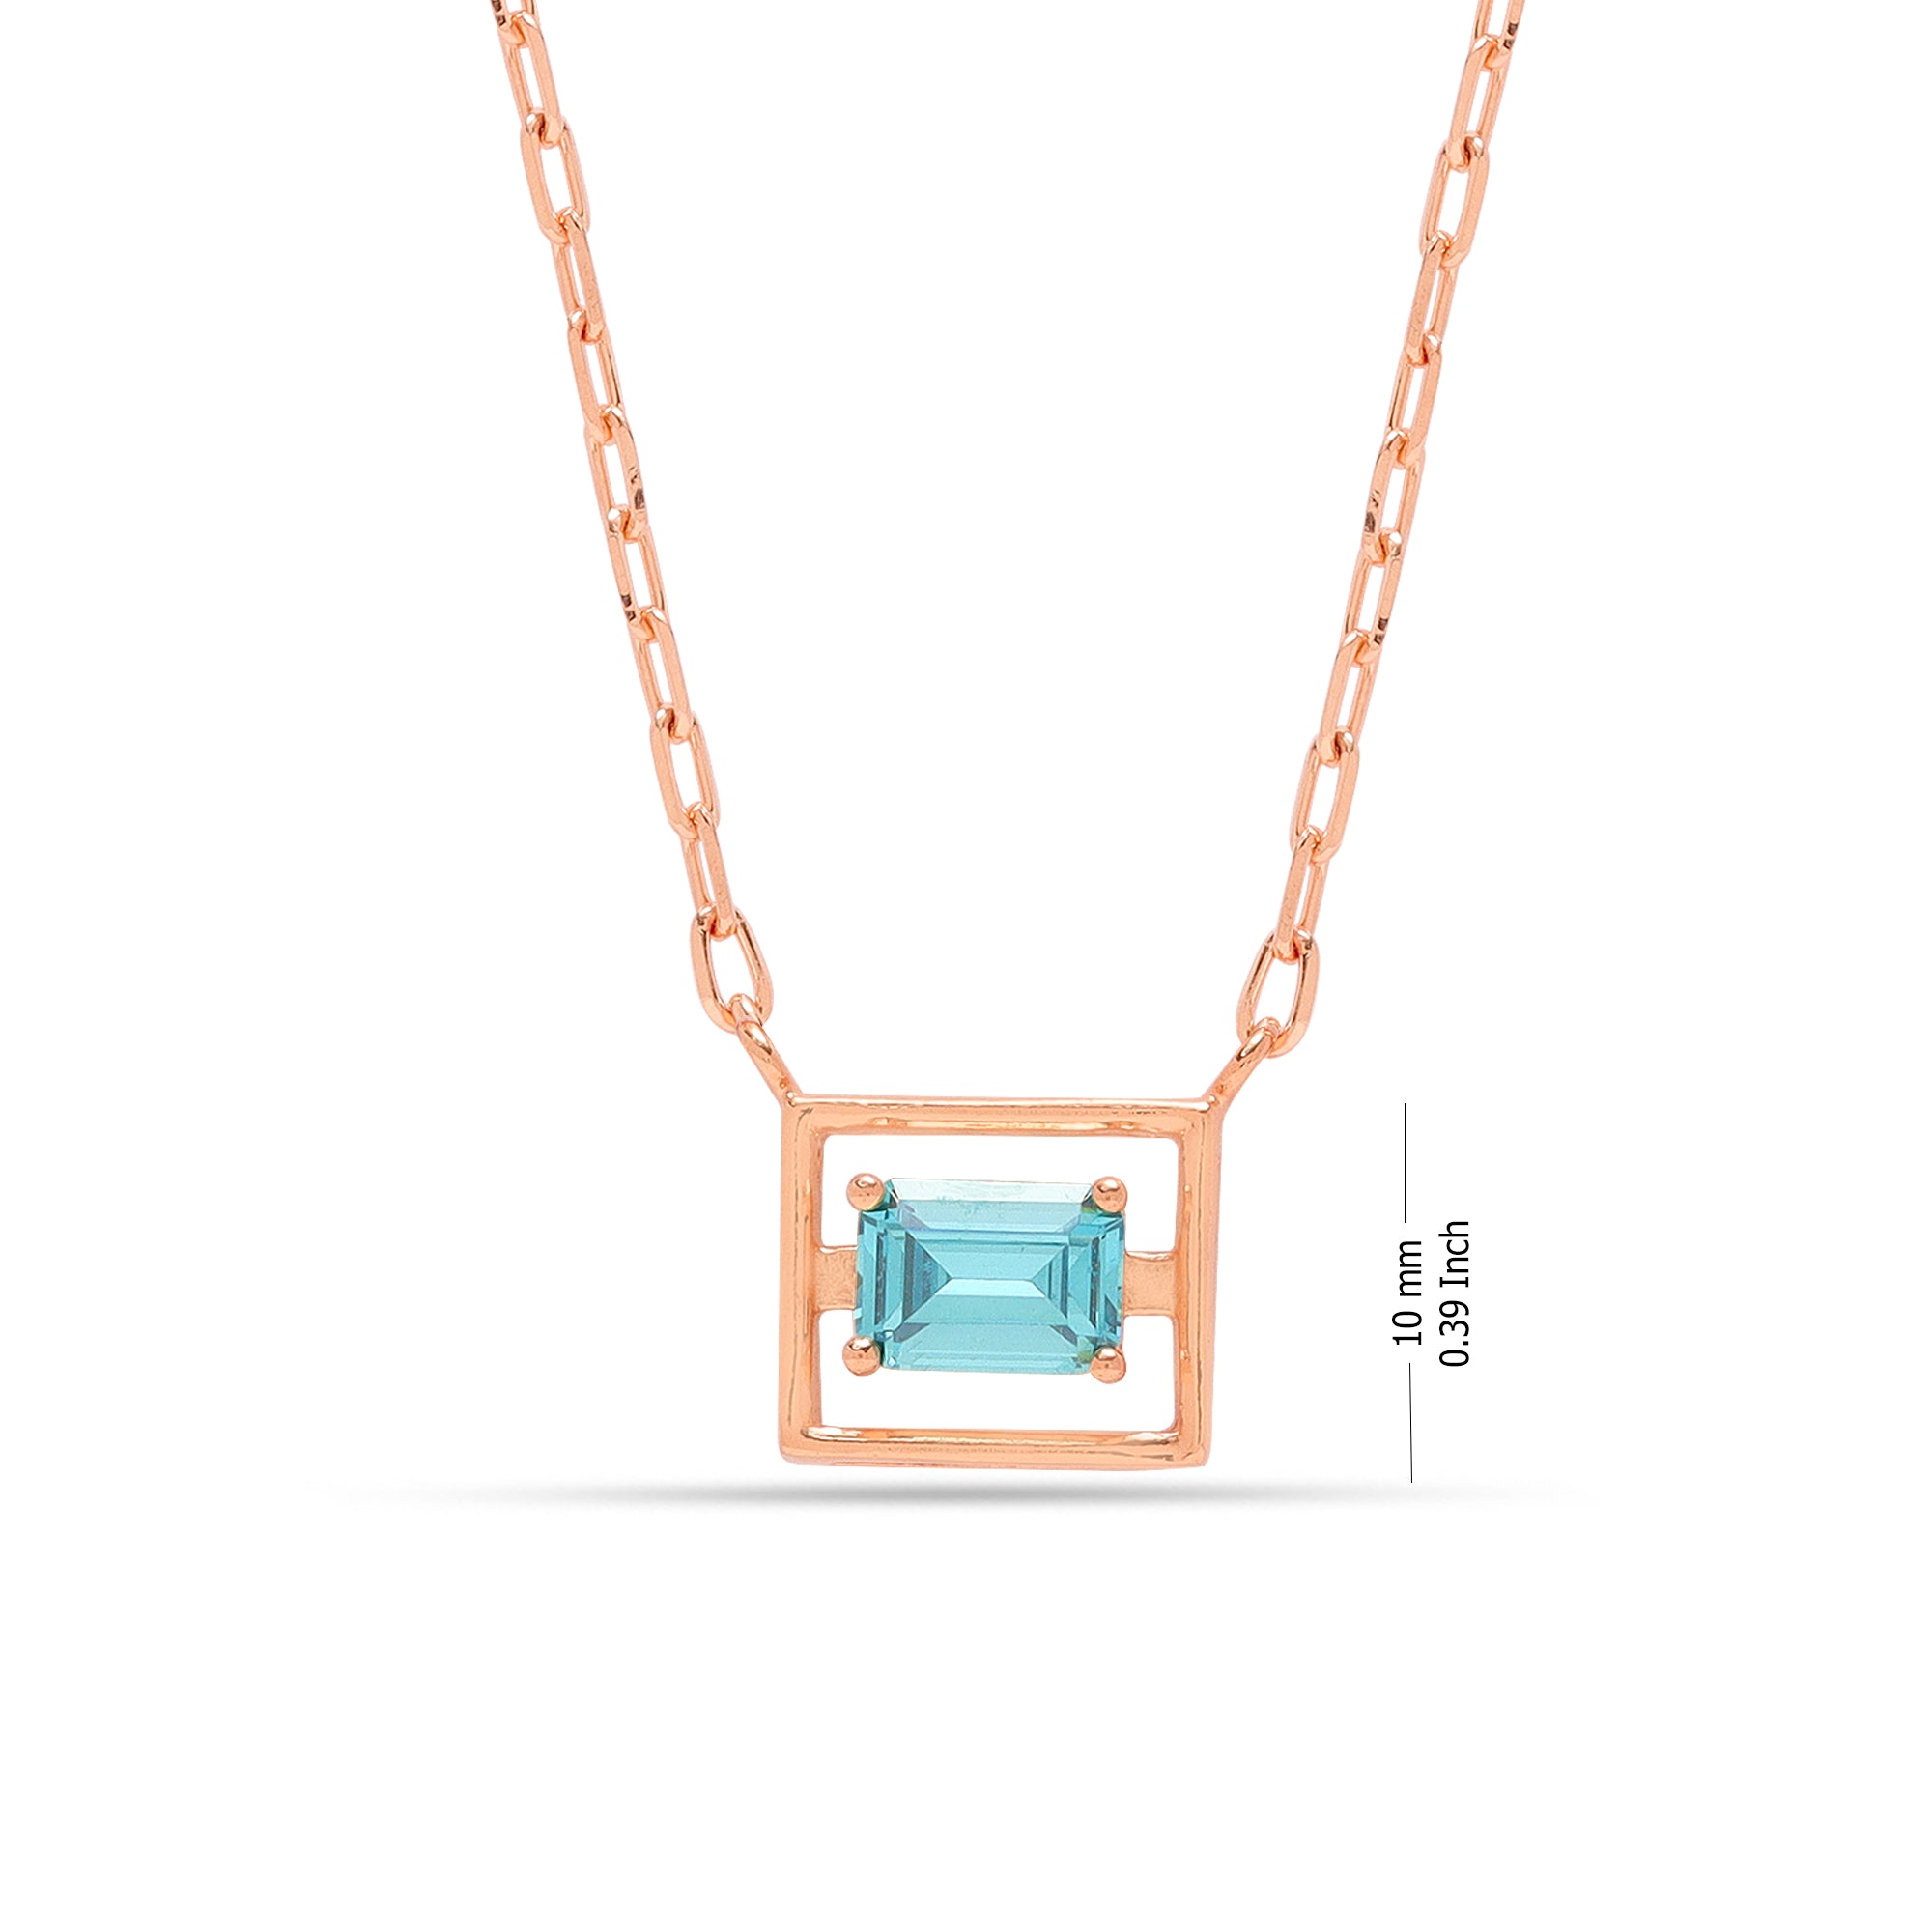 925 Sterling Silver Rose Gold-Plated Blue-Topaz Square Pendant Necklace for Teen Women